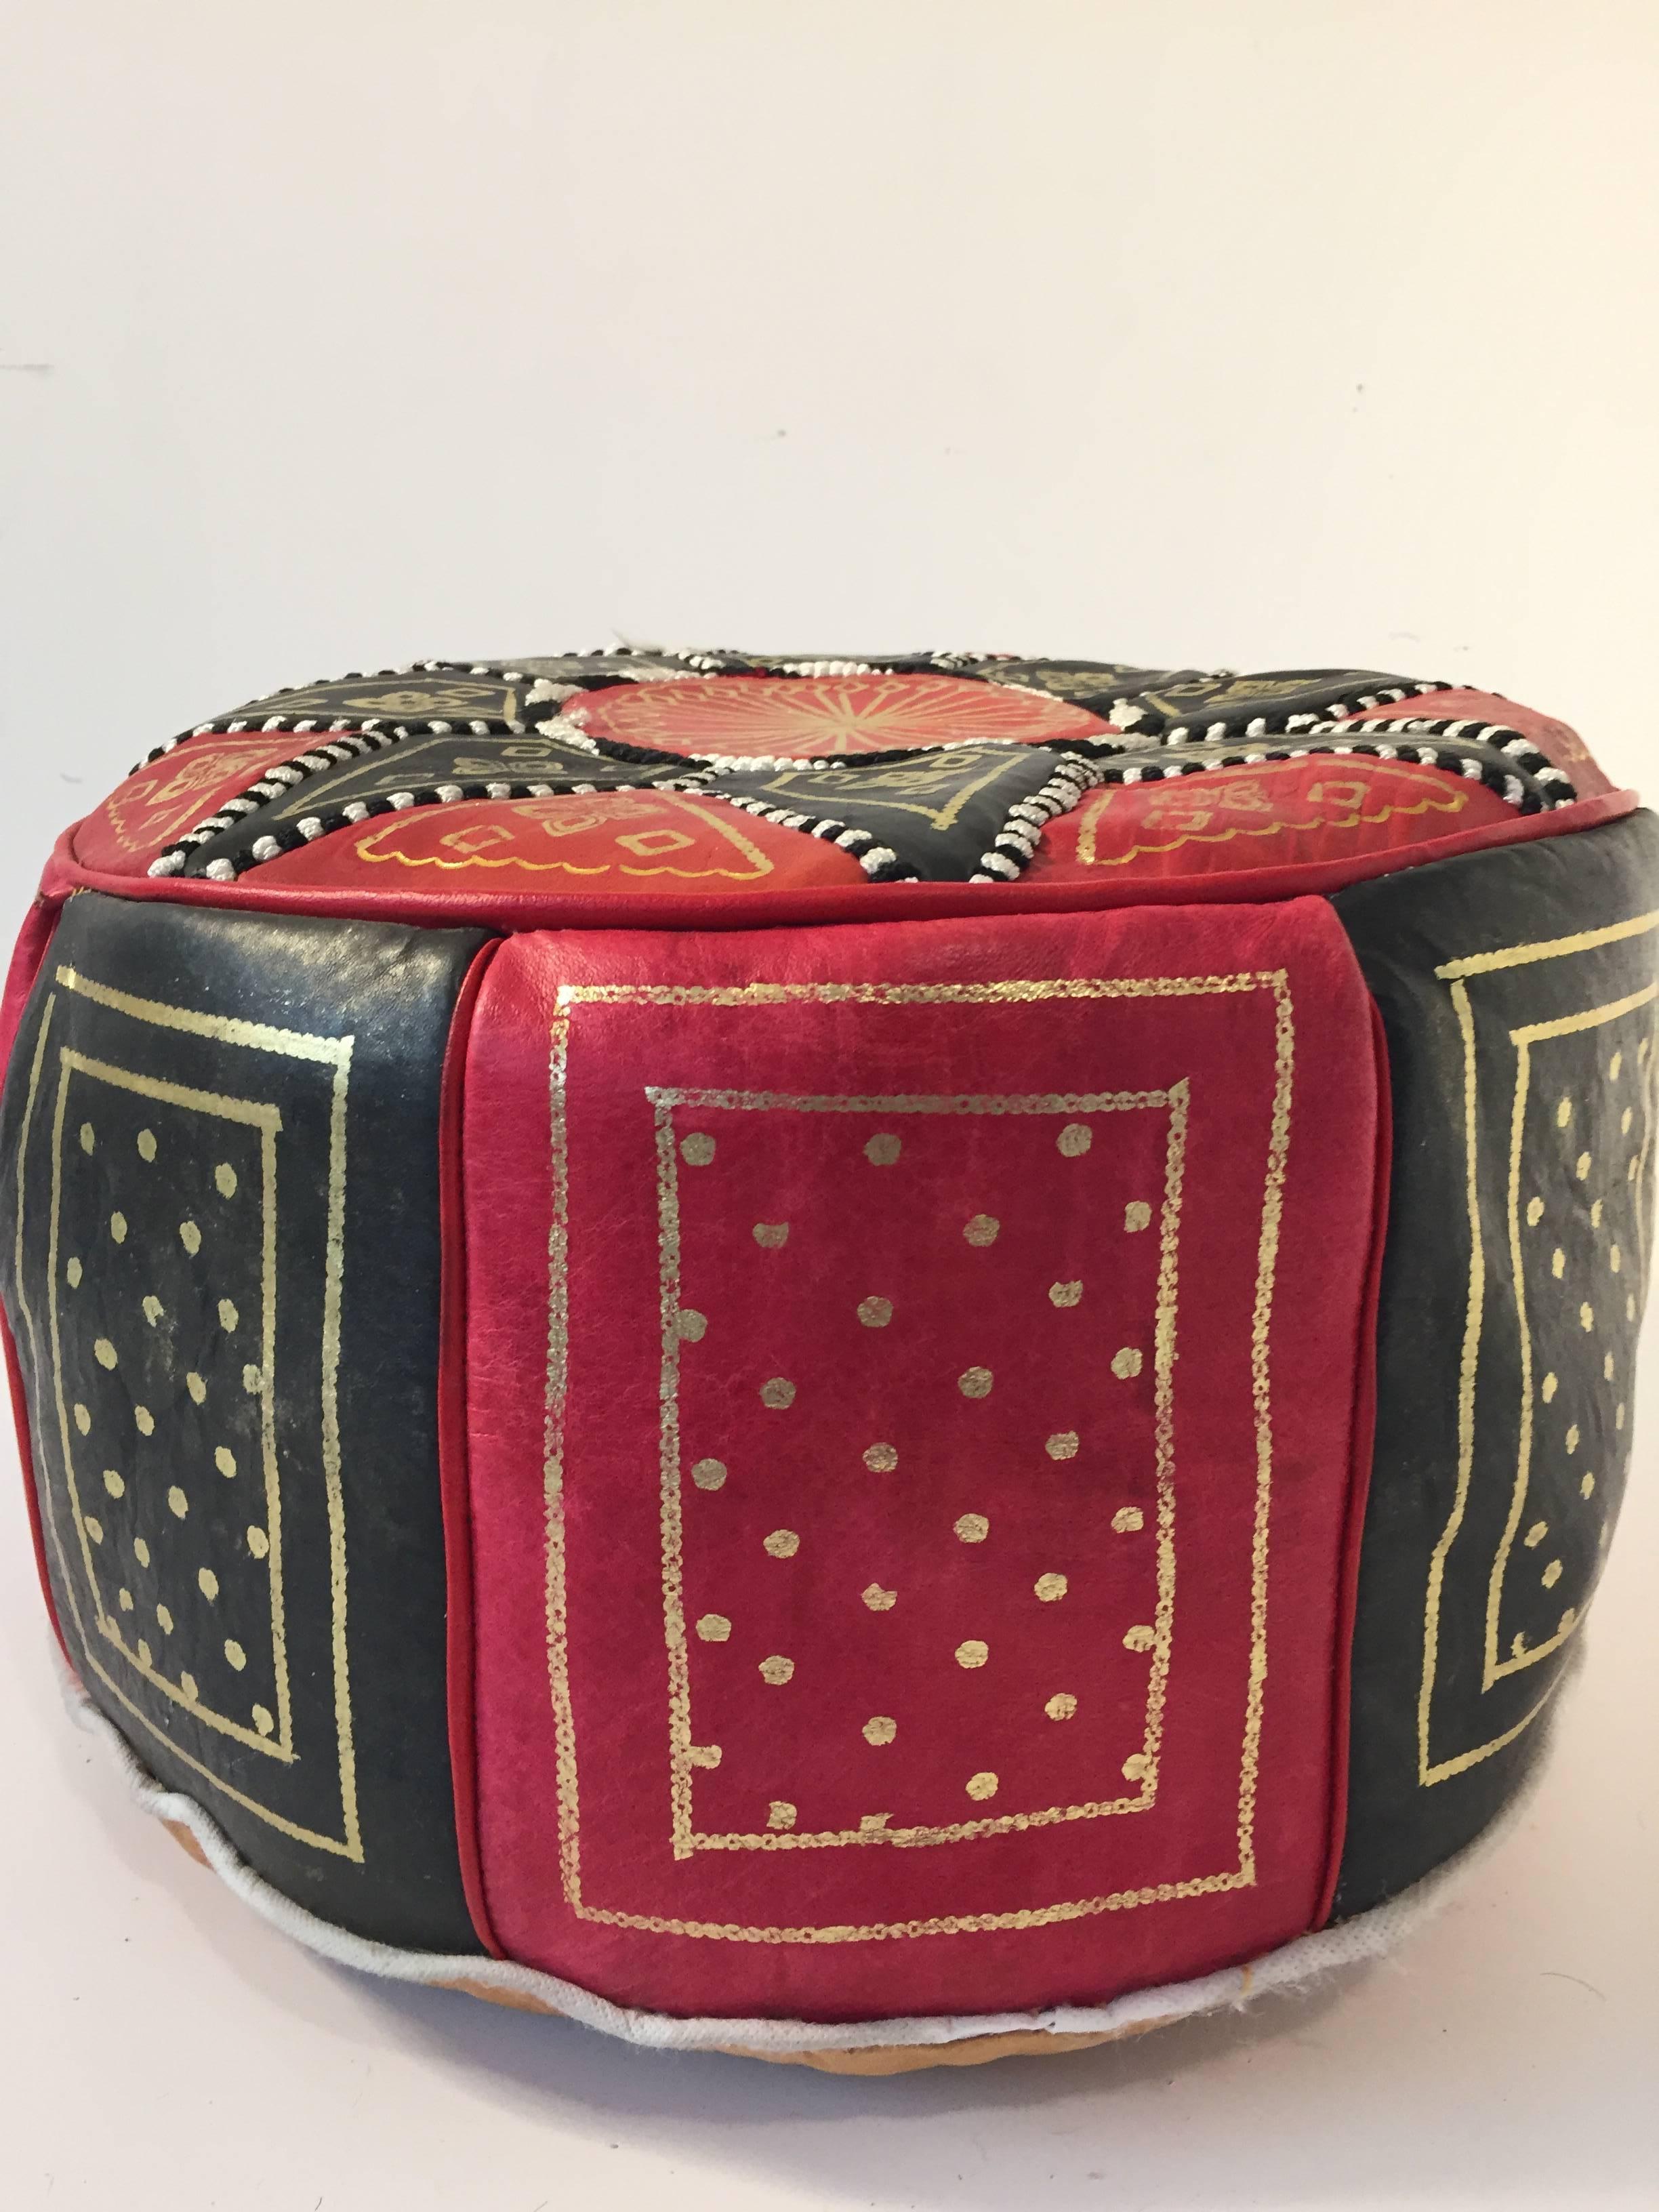 Moorish Moroccan Round Pouf Hand-Tooled and Embroidered in Fez Morocco